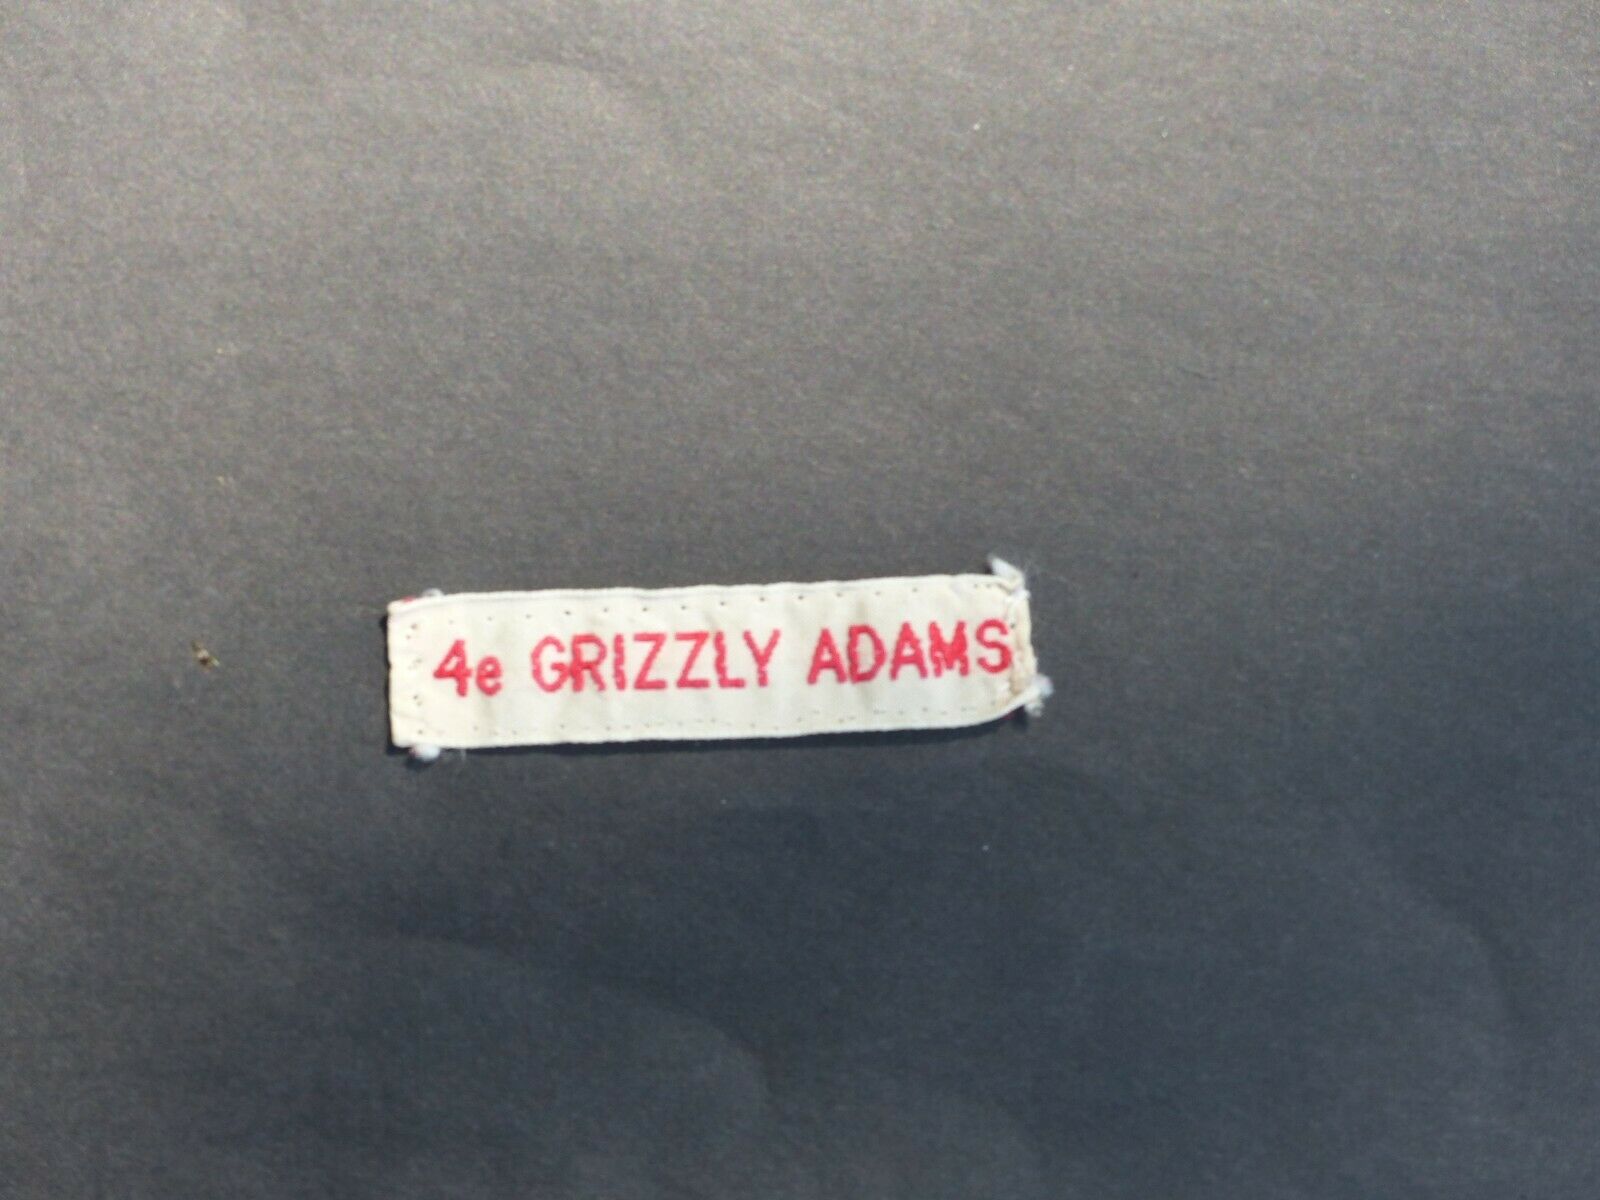 Used Vintage Scouts 4e Grizzly Adams Scout Group Woven Badge Strip Patch French